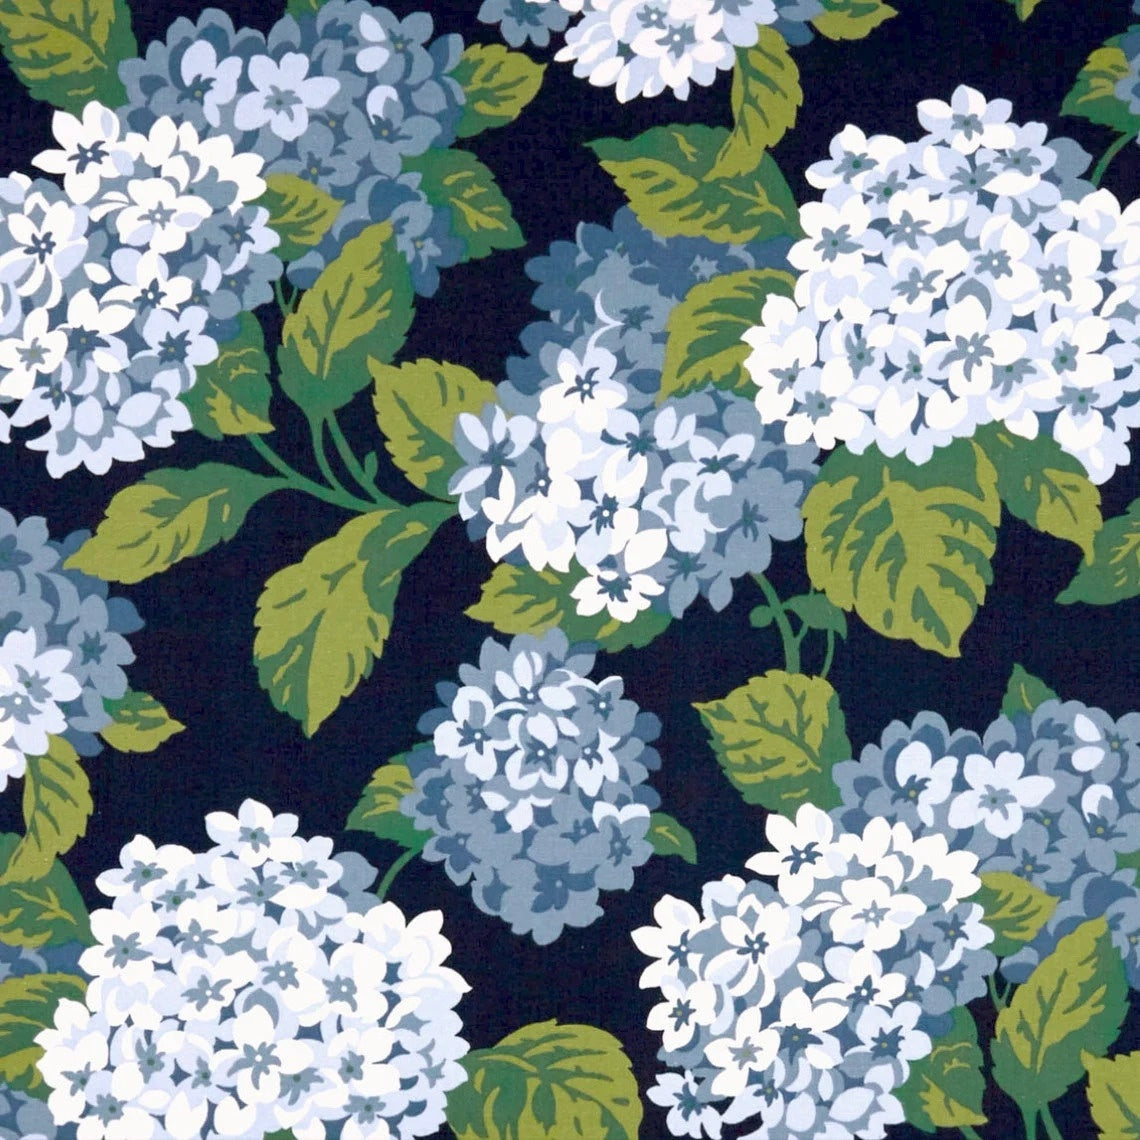 tie-up valance in summerwind navy blue hydrangea floral, large scale